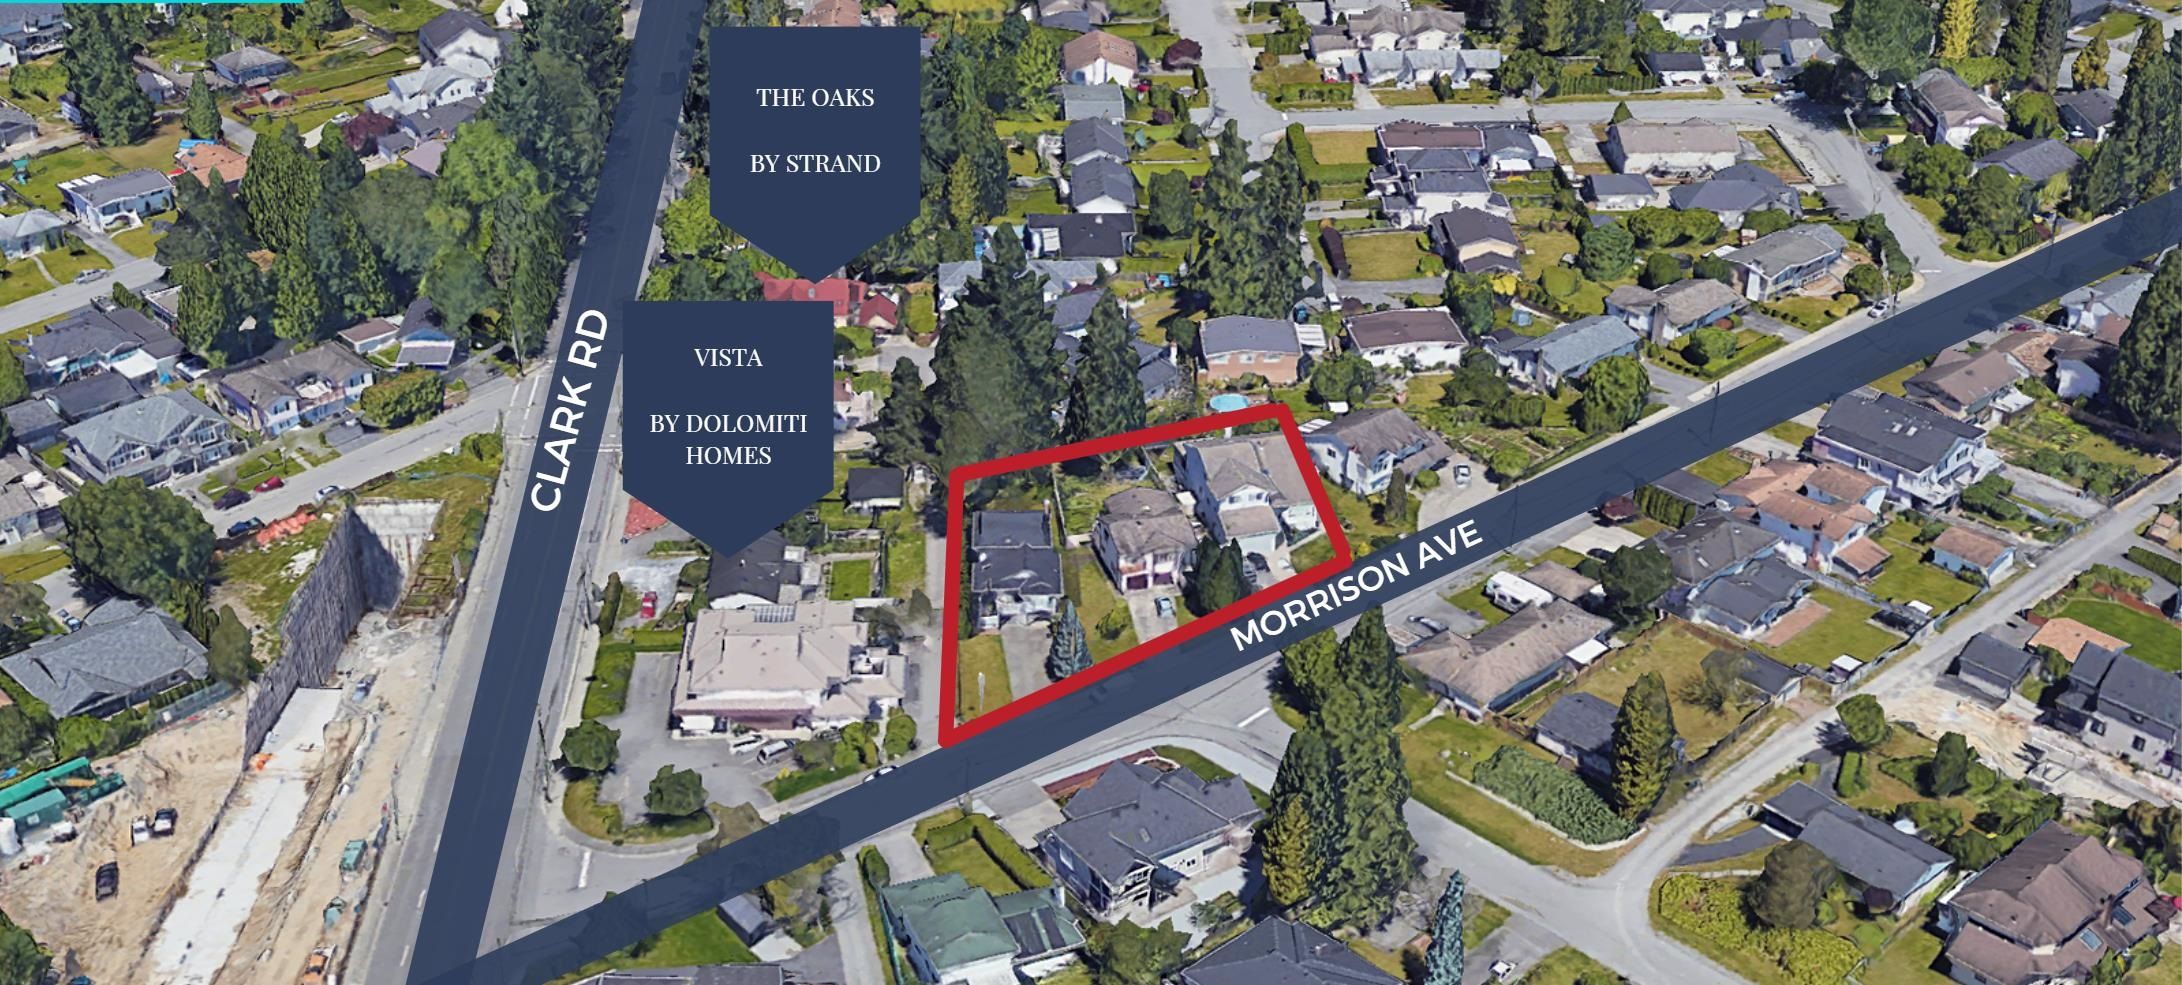 Main Photo: 673 MORRISON Avenue in Coquitlam: Coquitlam West Land Commercial for sale : MLS®# C8042125